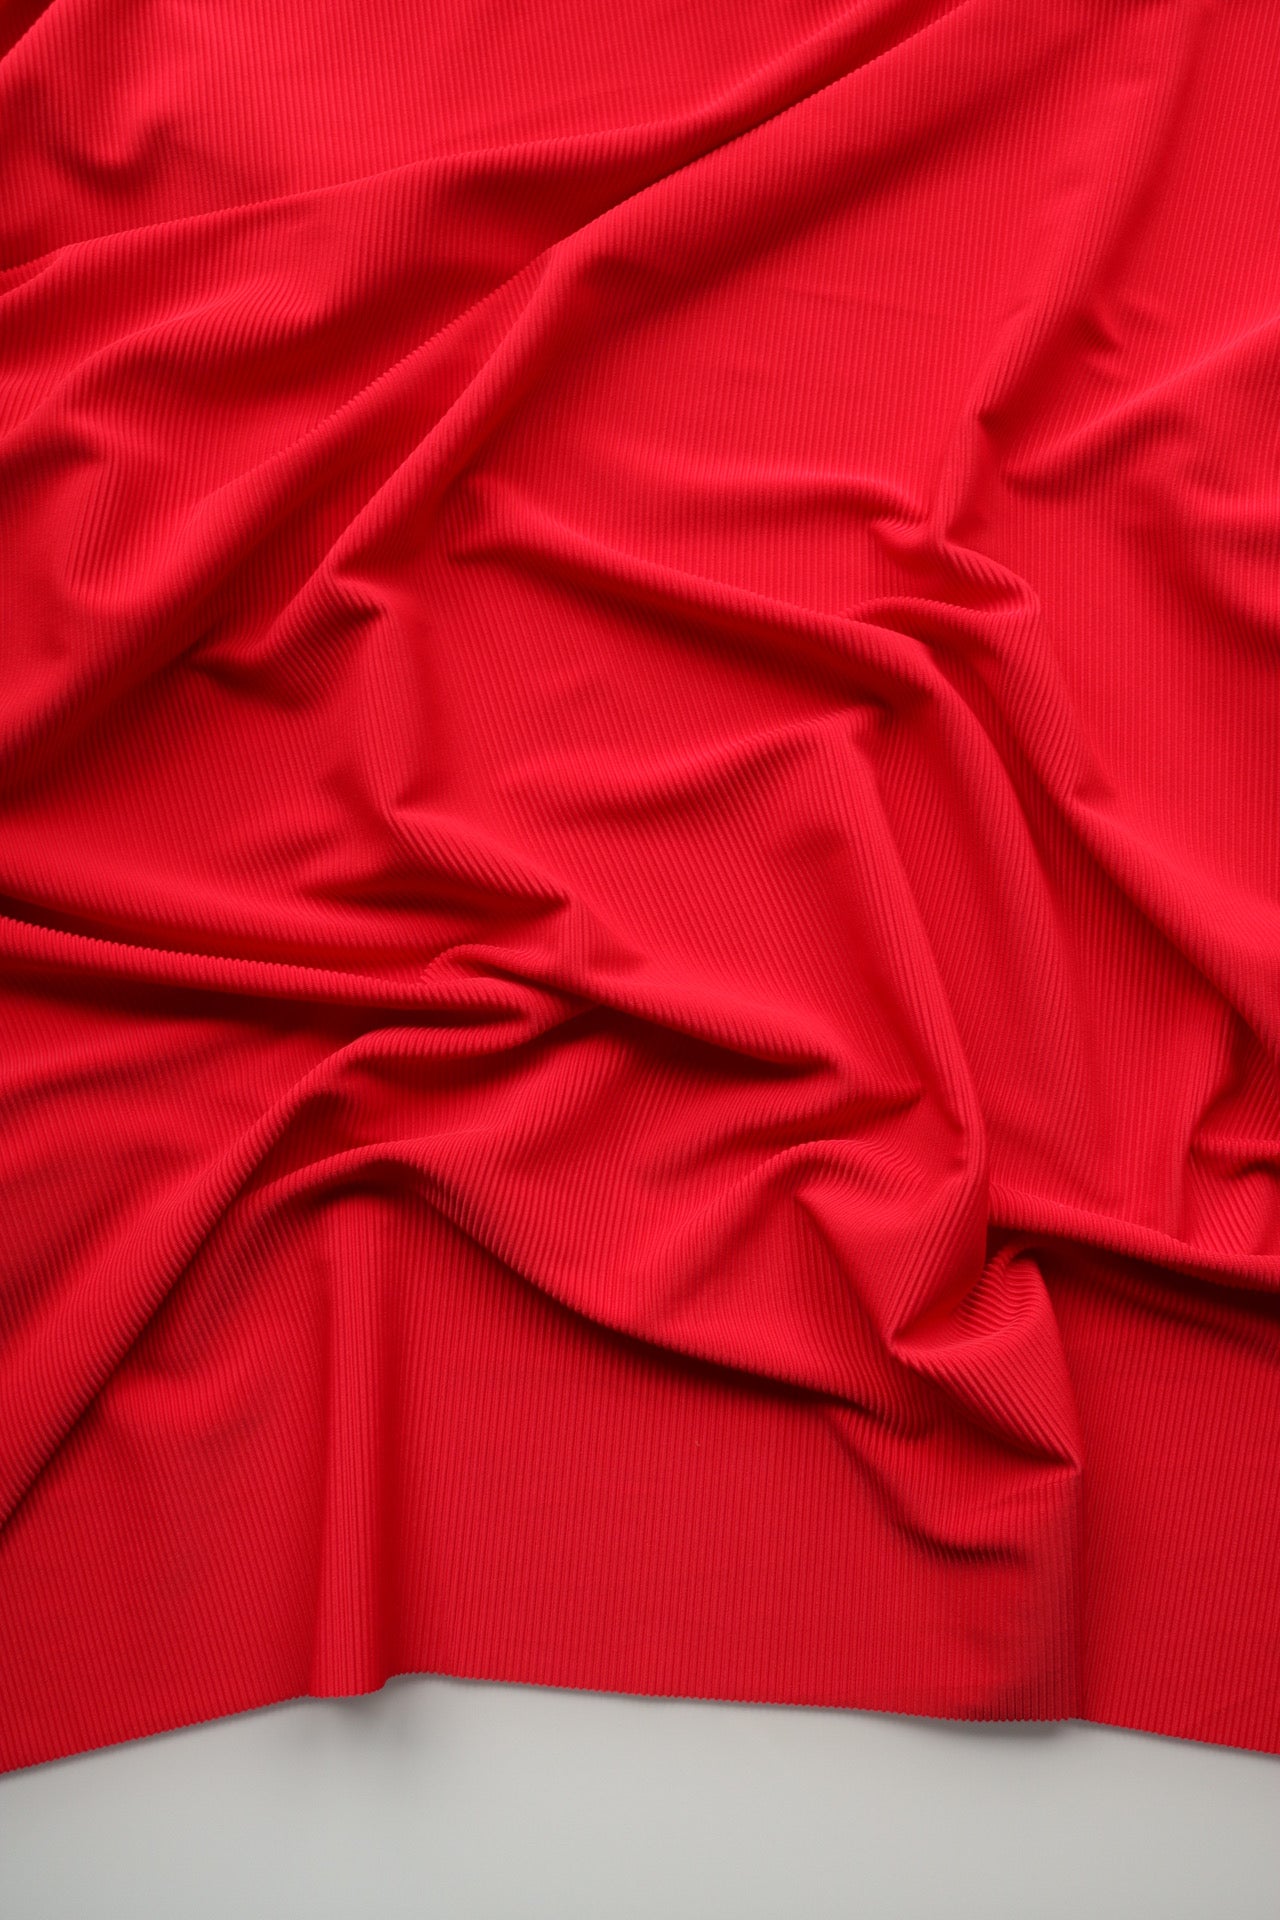 Red Polyester/Spandex Fleece Fabric